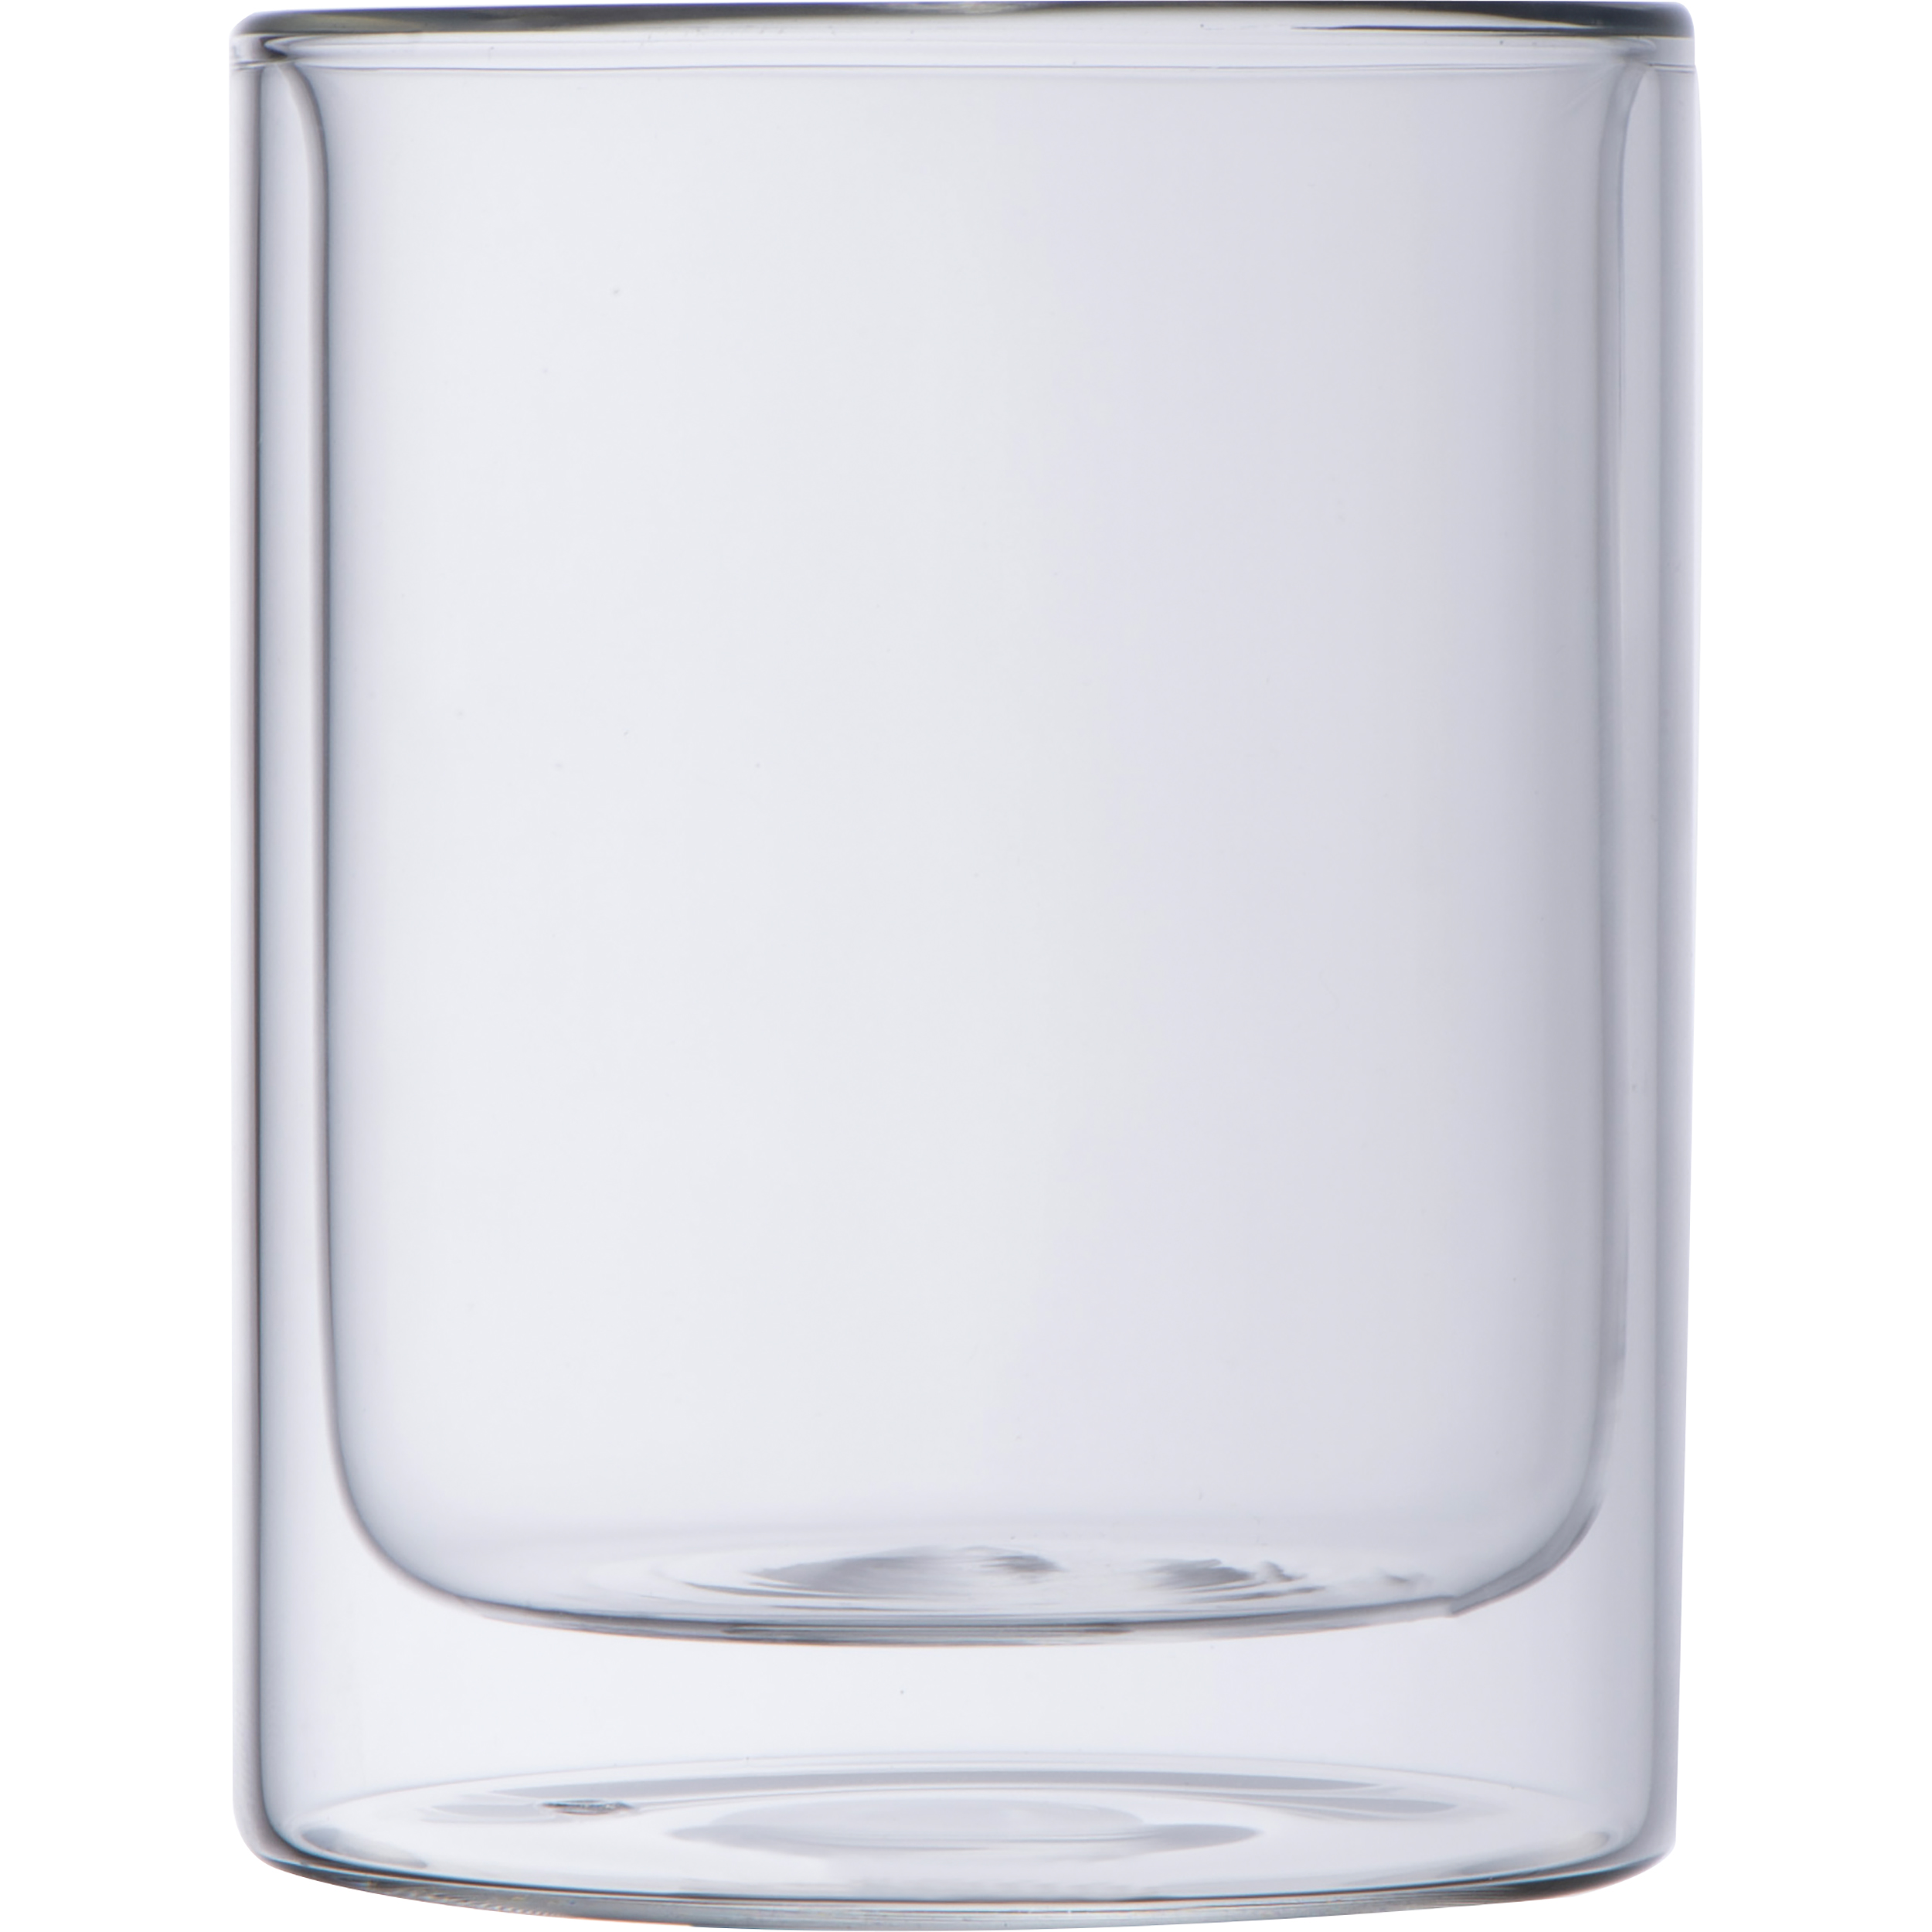 Double-walled glass cup 330ml